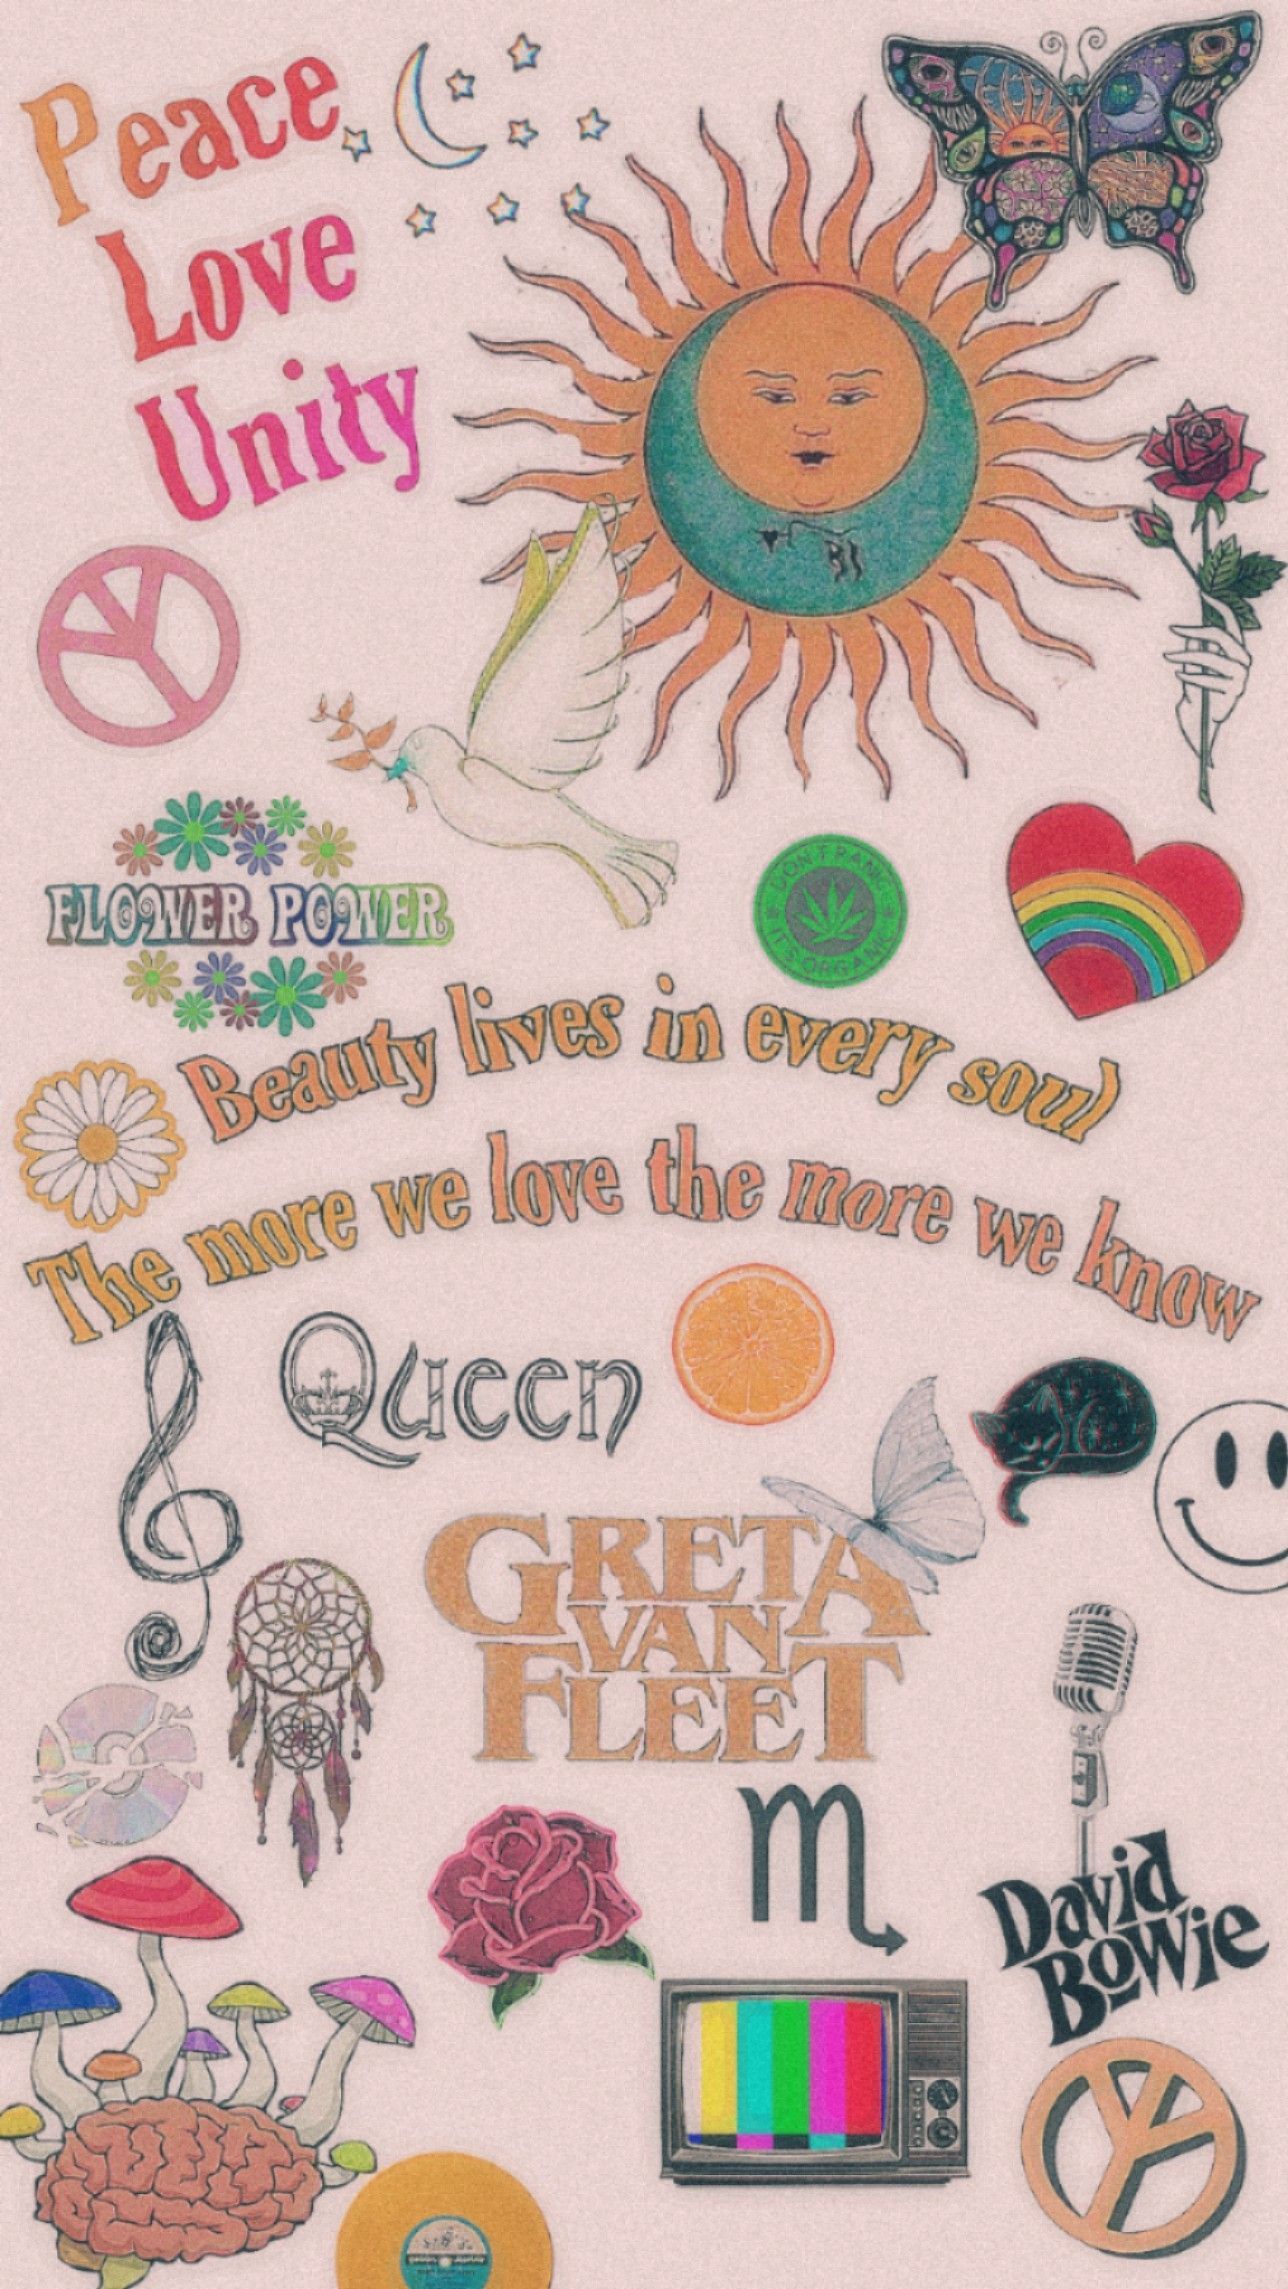 A sticker sheet with a sun, peace signs, flowers, and a butterfly. - David Bowie, peace